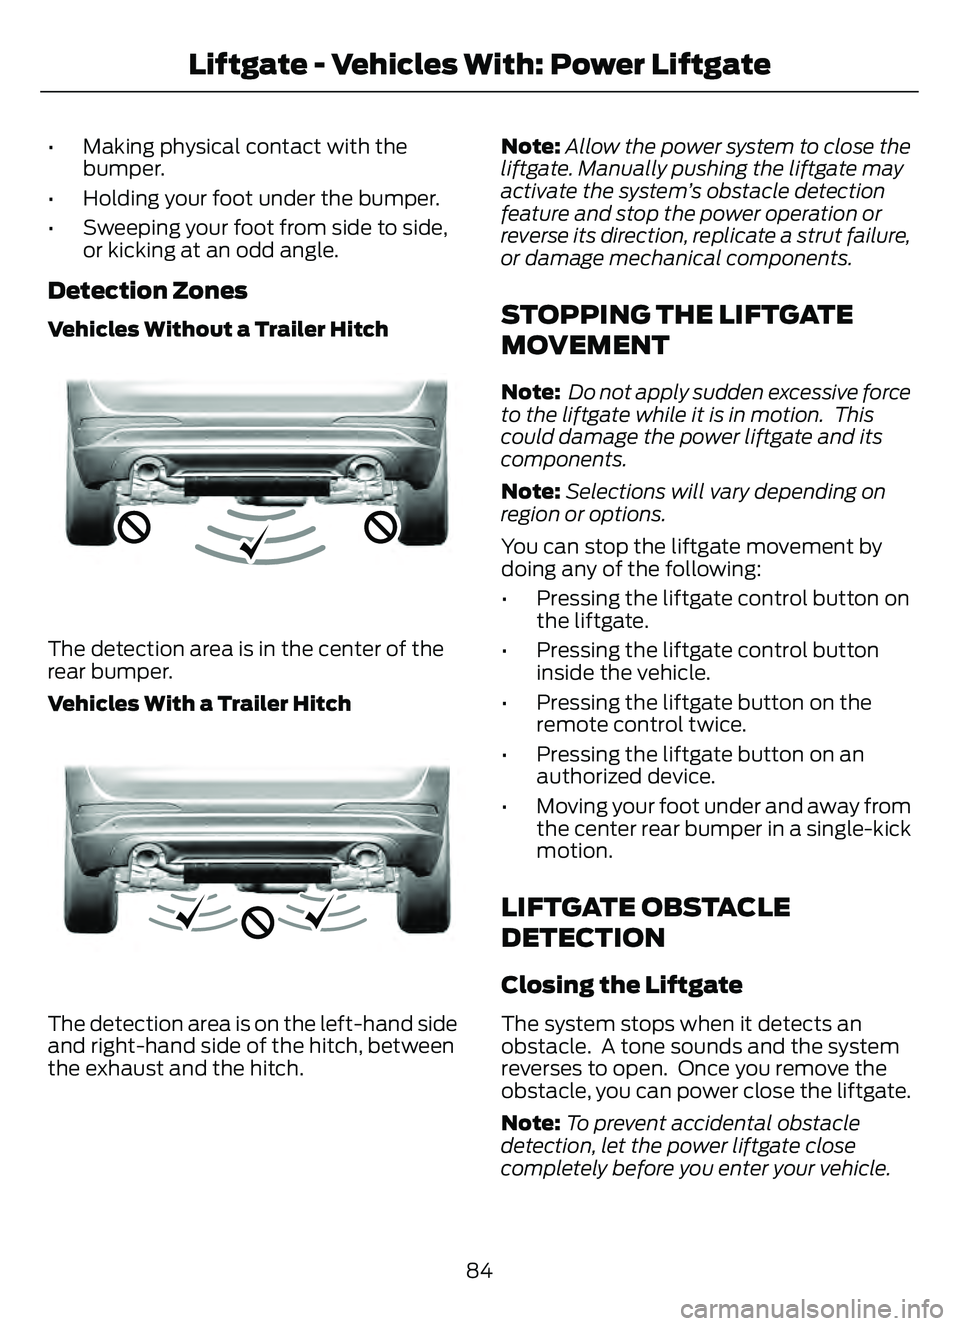 FORD ESCAPE 2022  Owners Manual • Making physical contact with thebumper.
• Holding your foot under the bumper.
• Sweeping your foot from side to side, or kicking at an odd angle.
Detection Zones
Vehicles Without a Trailer Hit